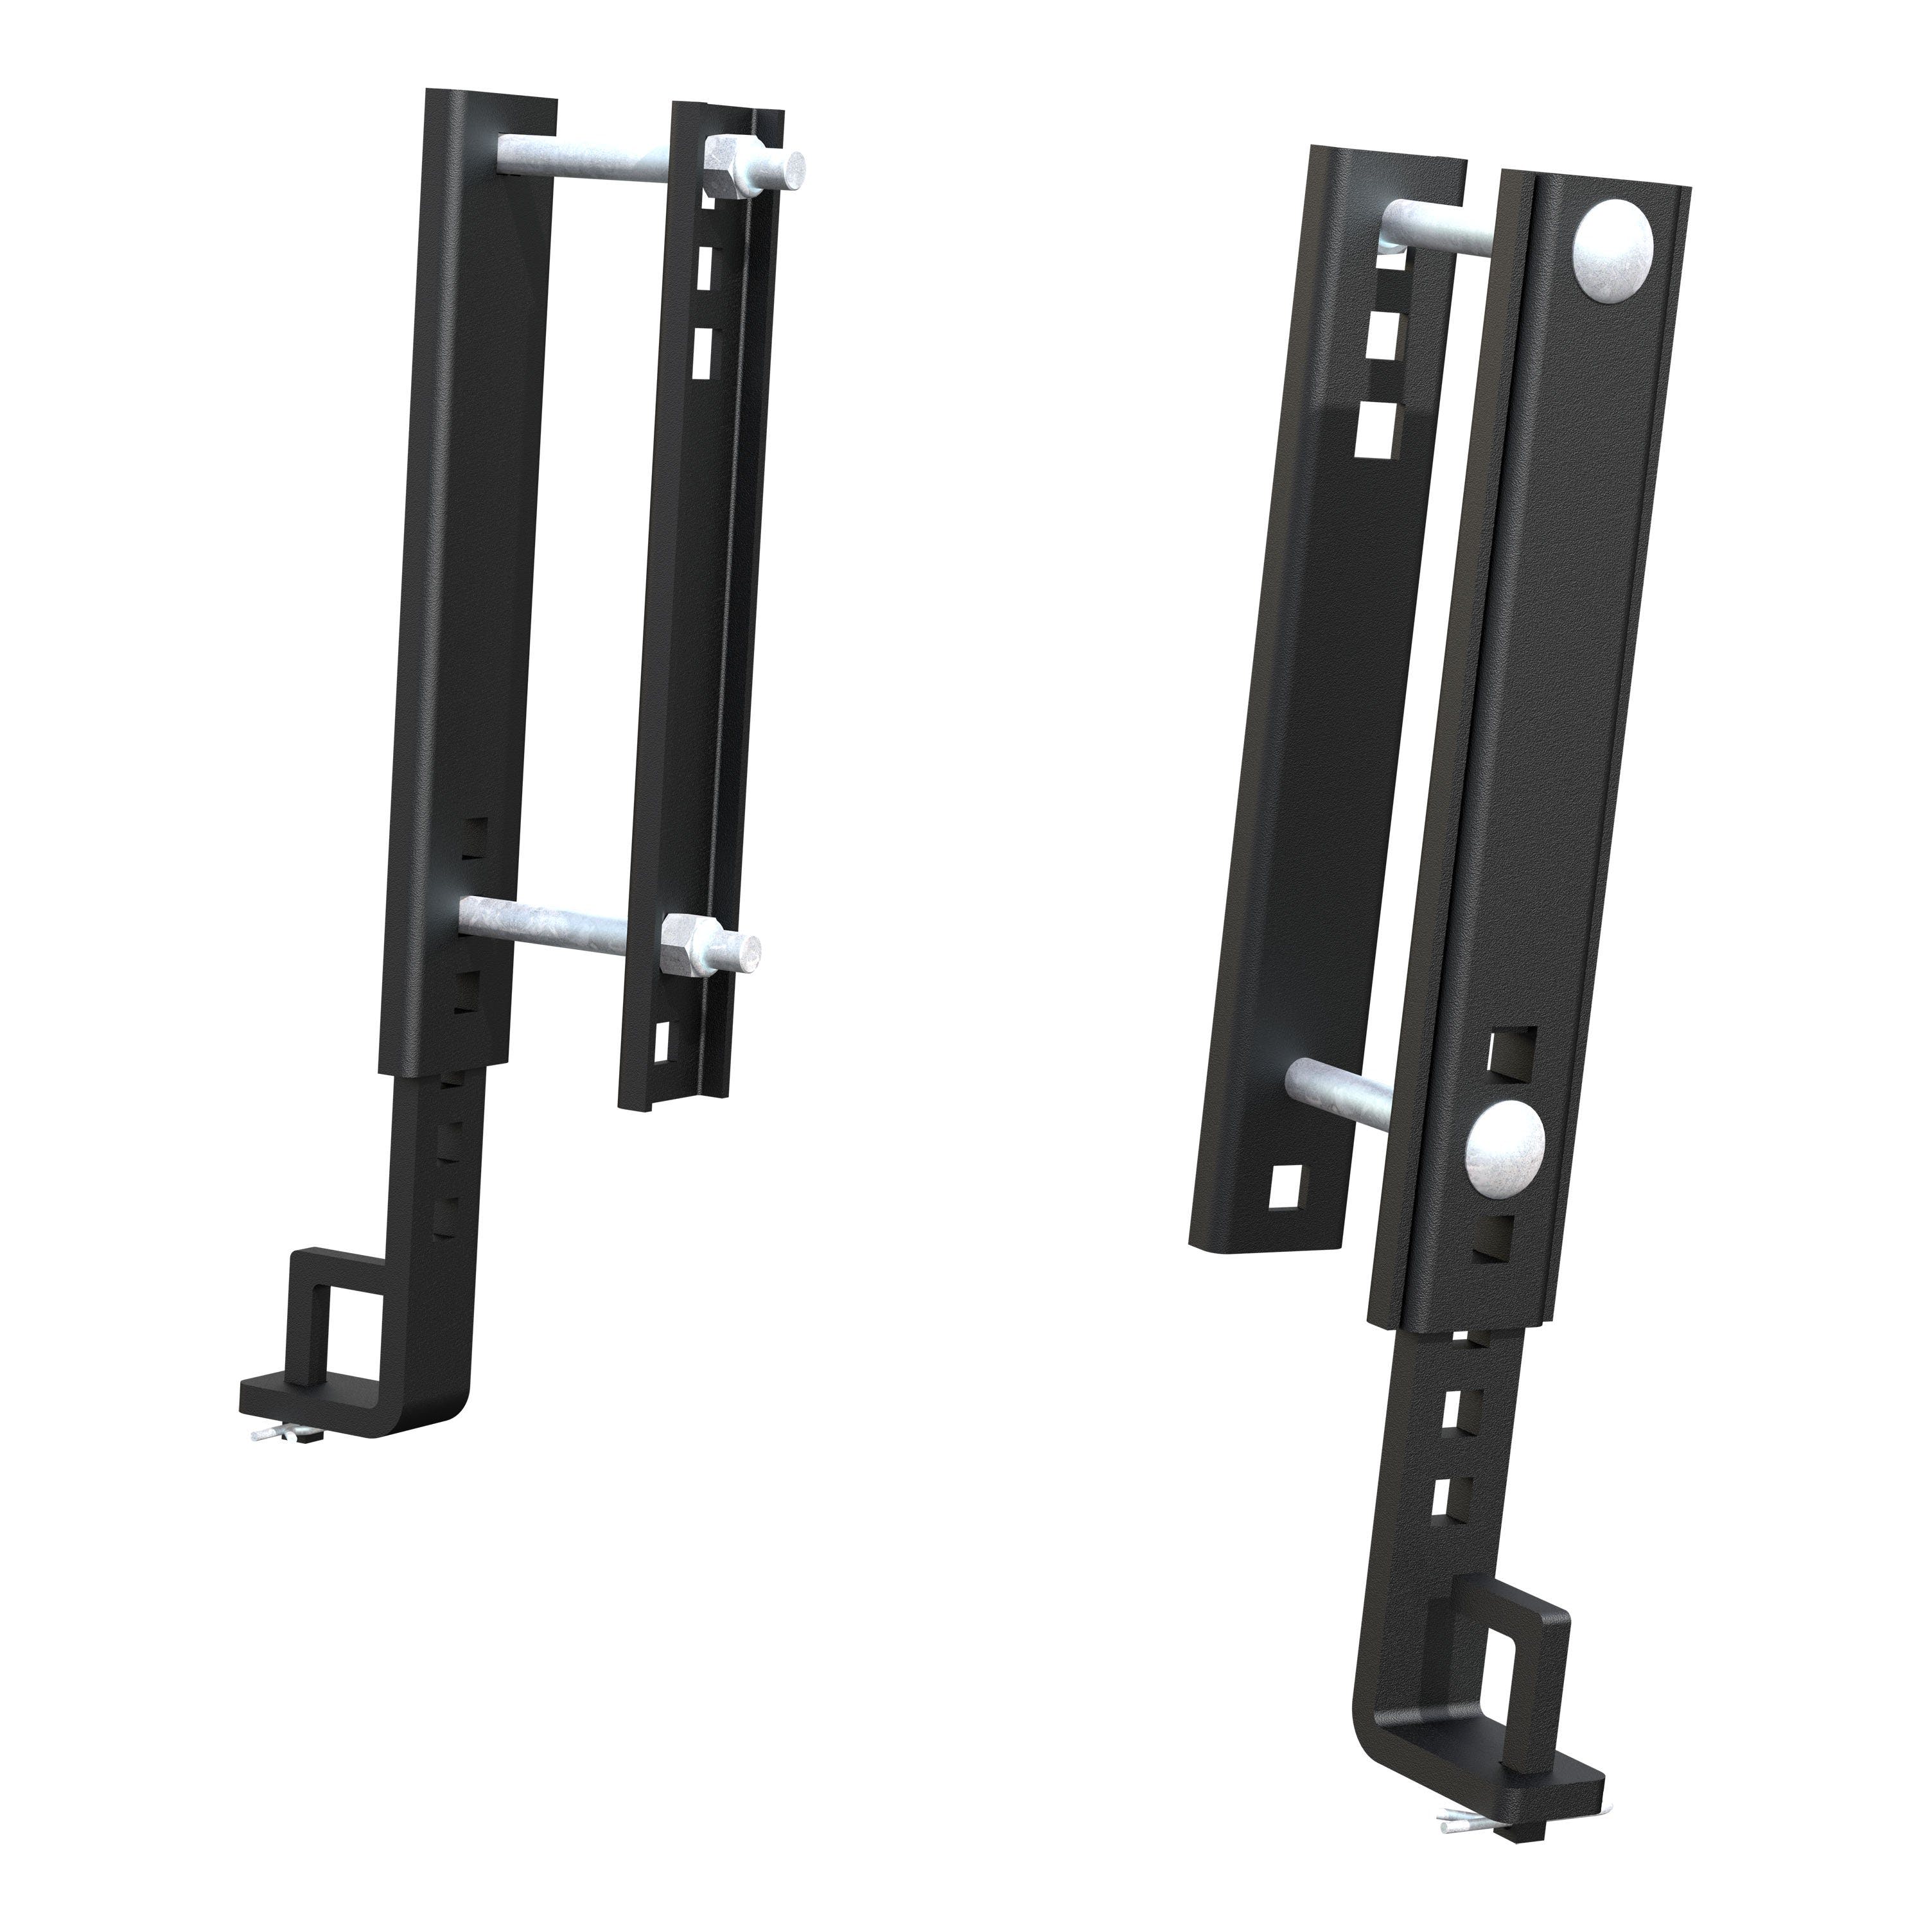 CURT 17516 Replacement TruTrack 10 Adjustable Support Brackets (2-Pack)